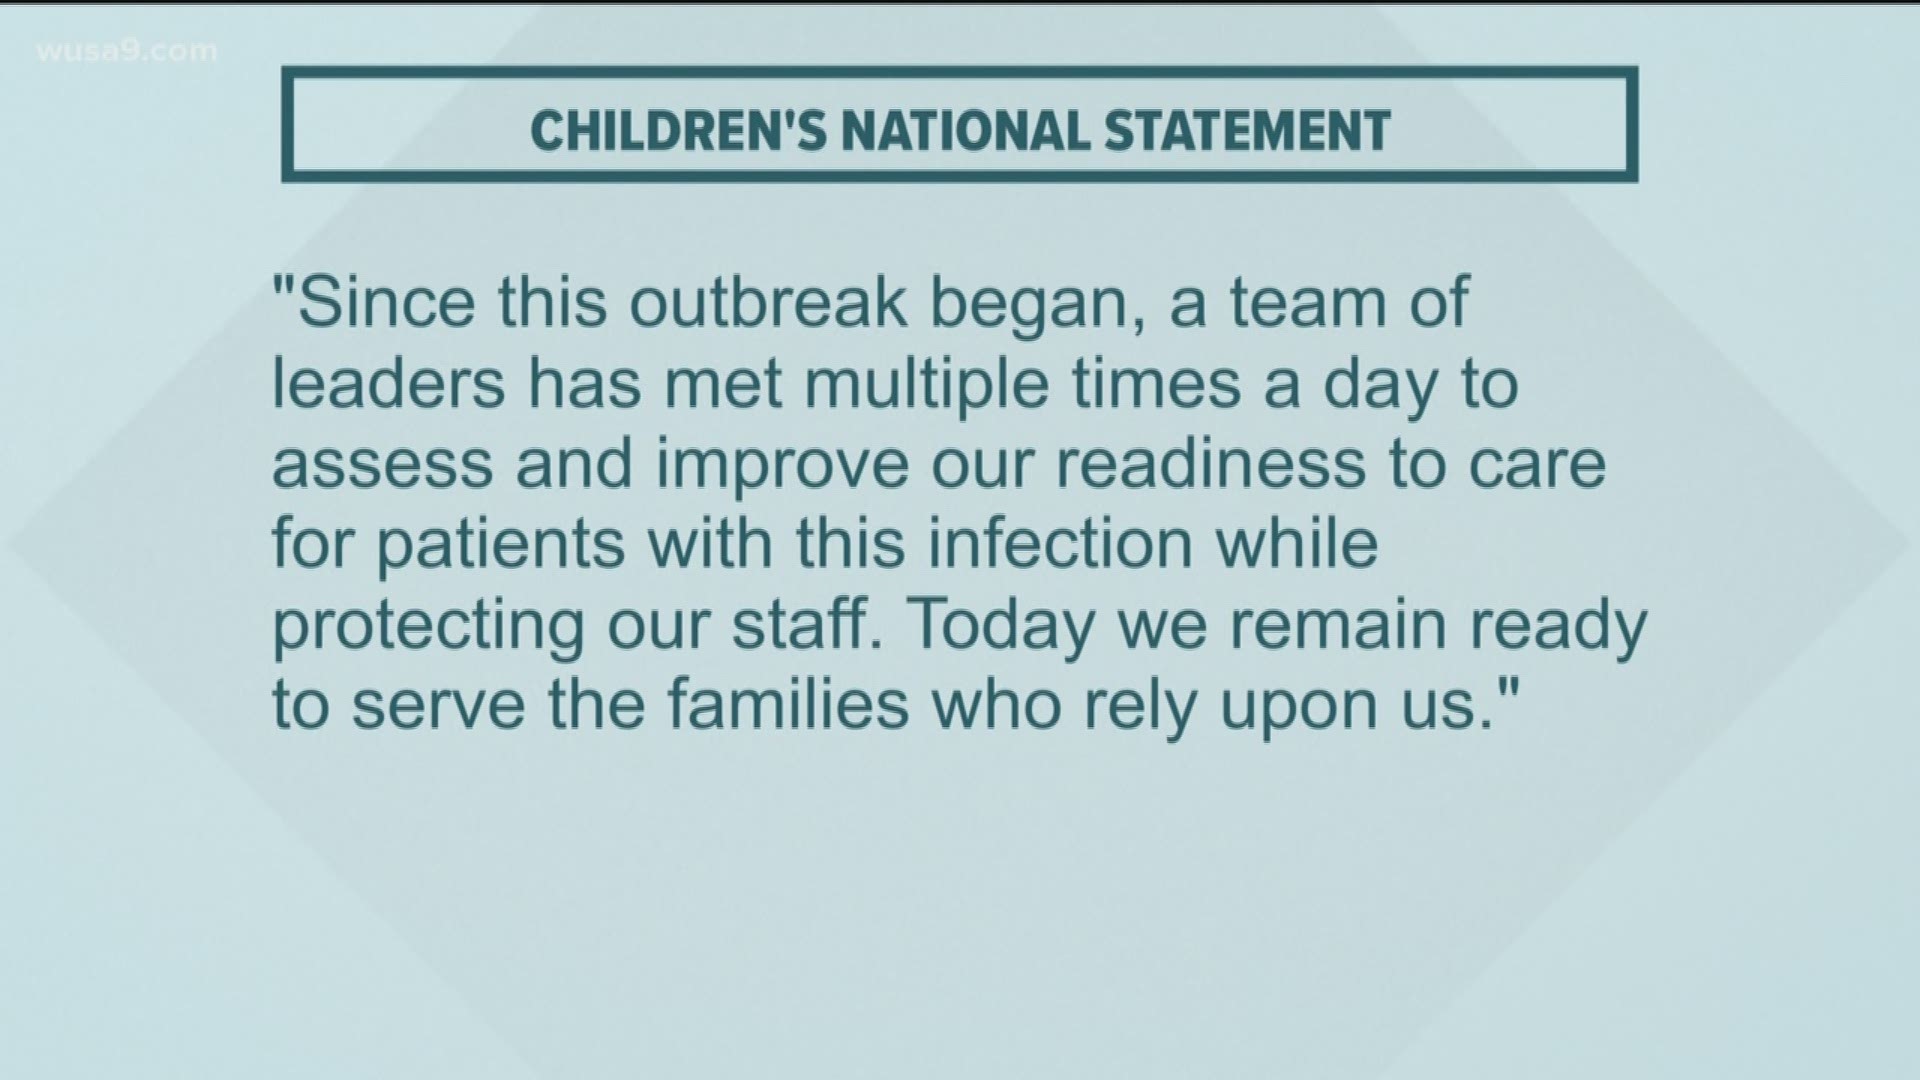 The hospital released a statement about the incident.